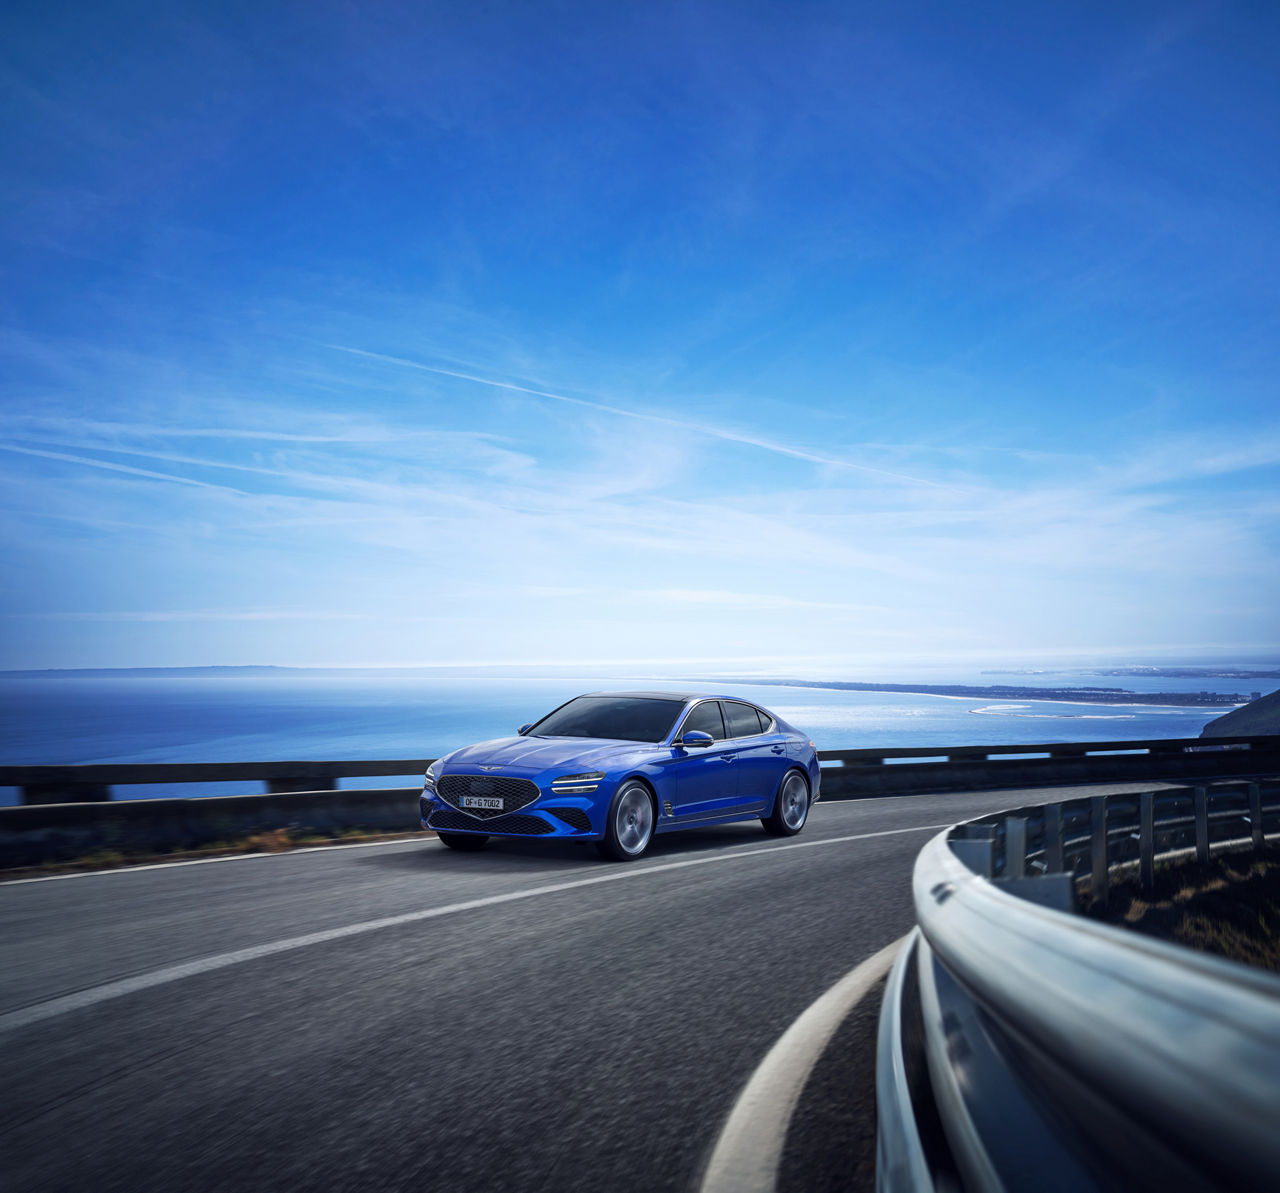 Blue Genesis G70 on a road with the sea in the background